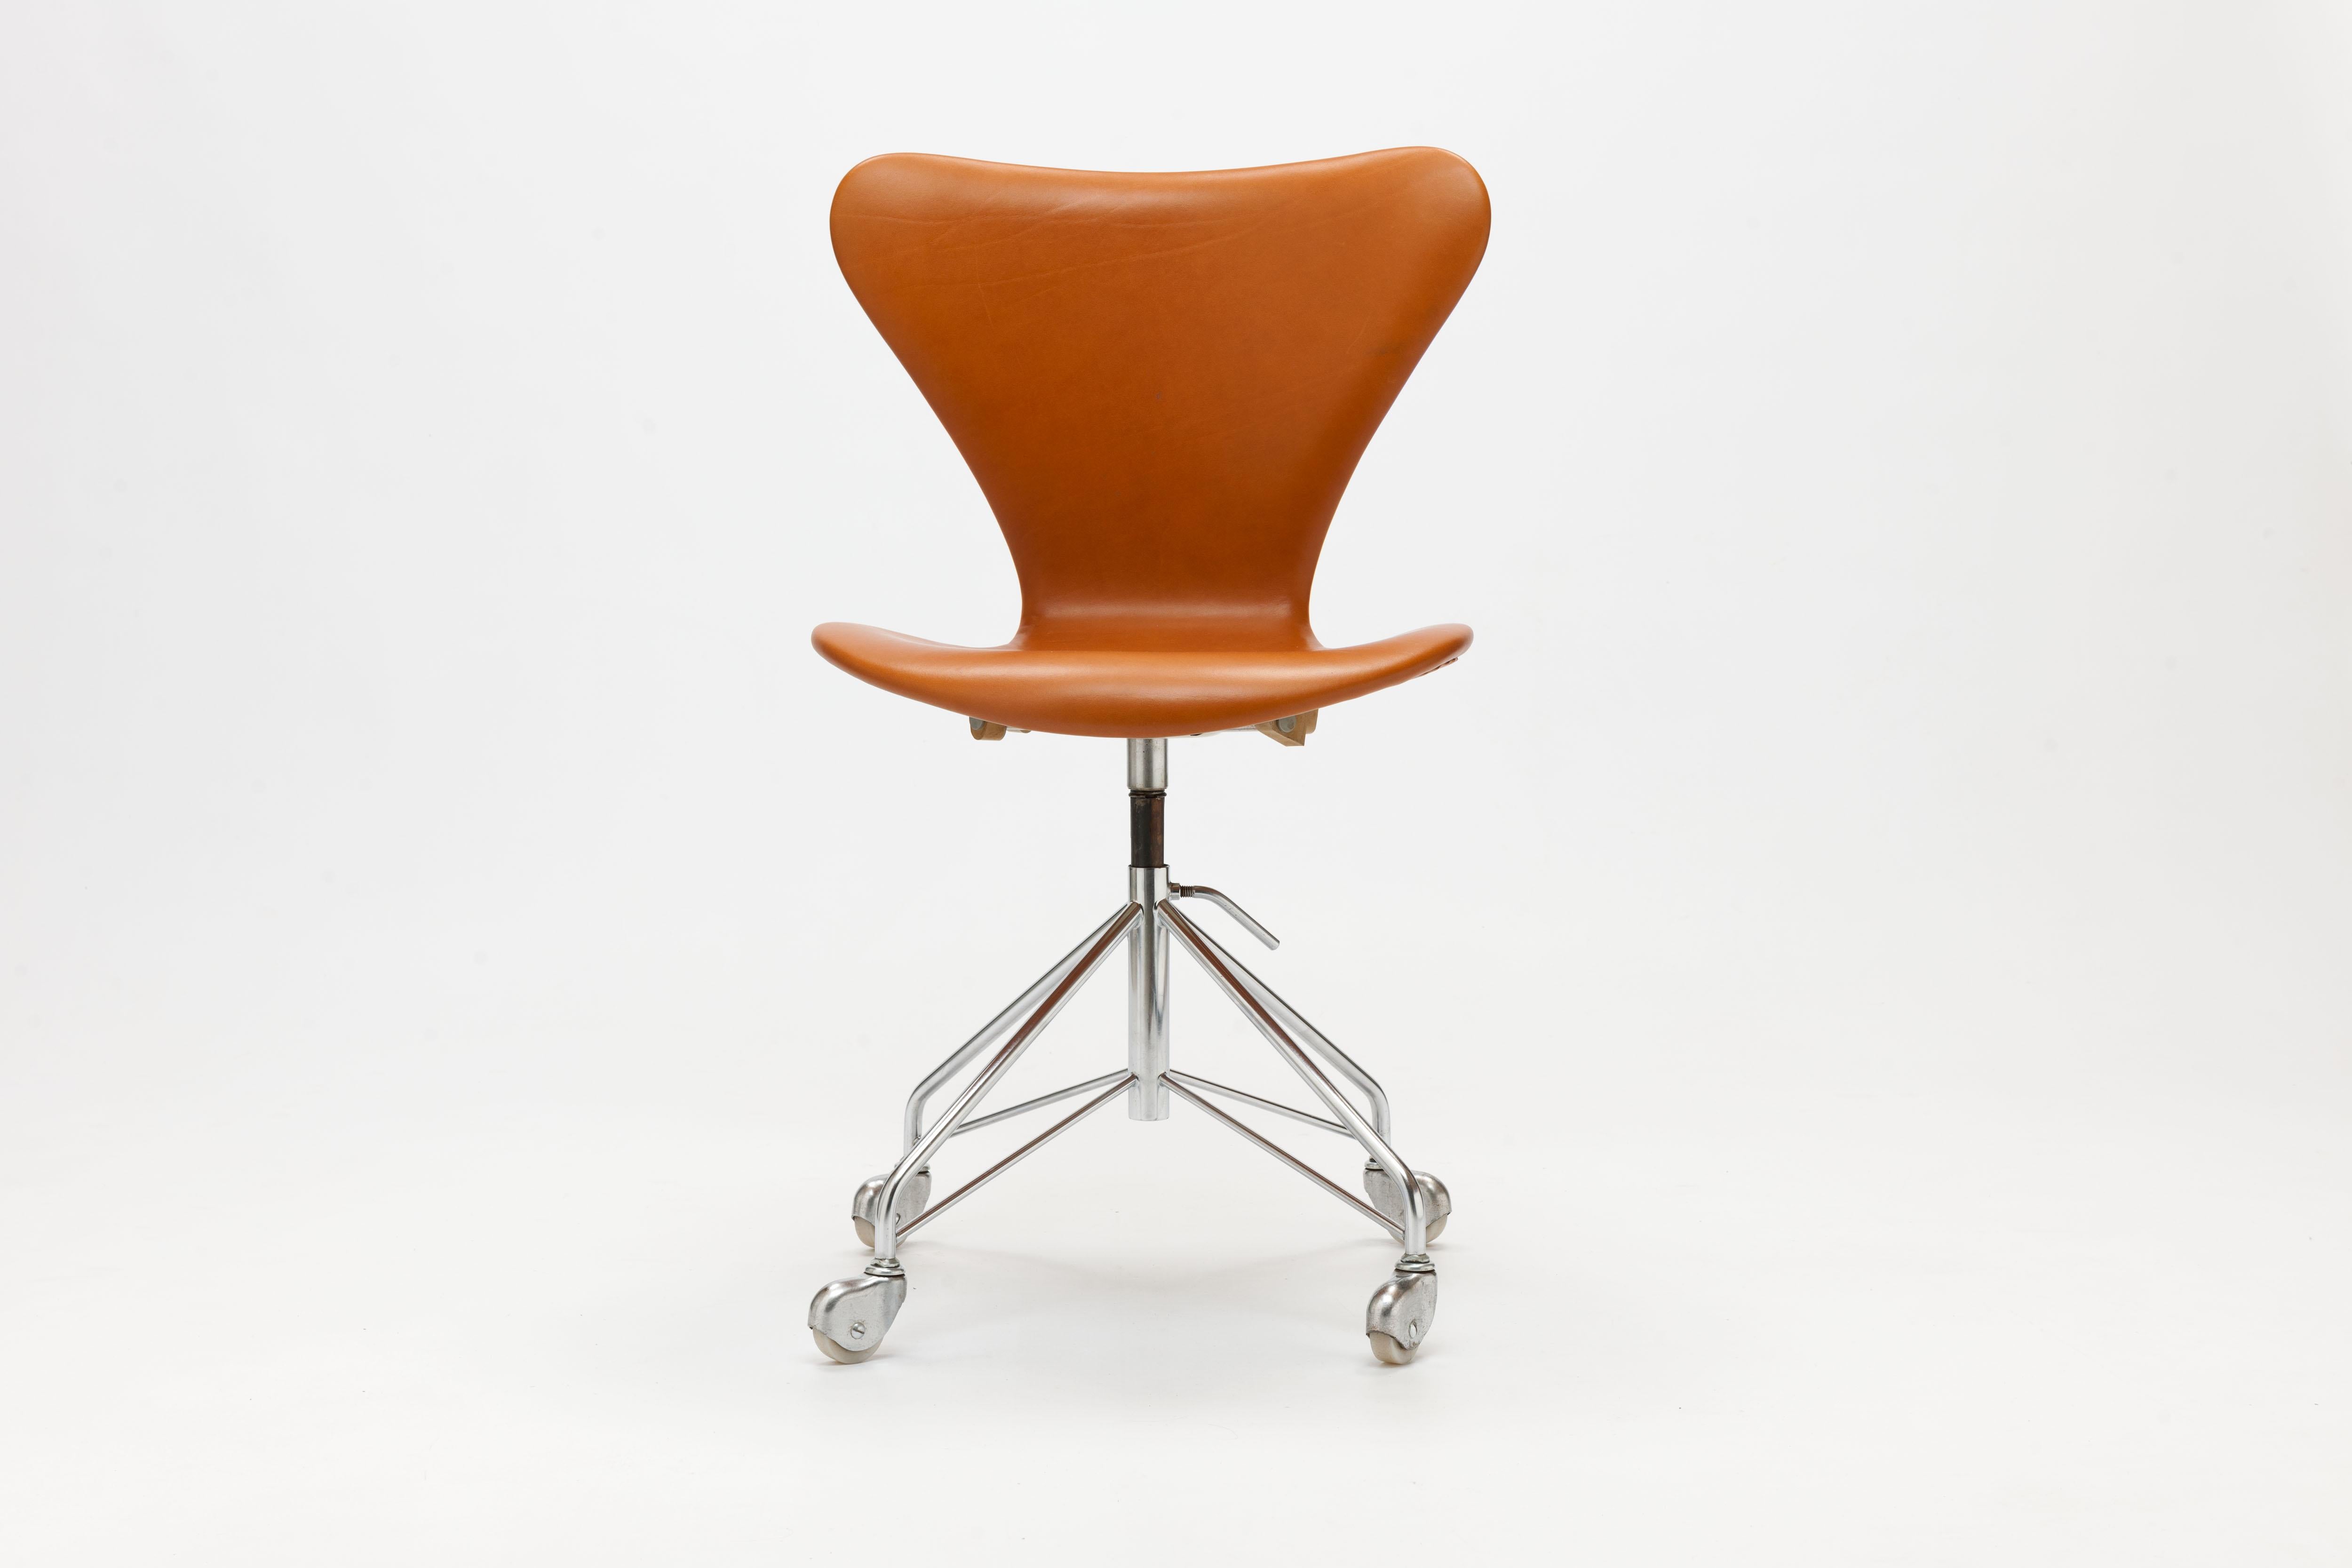 Arne Jacobsen swivel desk chair model 3117 office chair. Original, first series four-star swivel base with chromed steel feet on casters. Designed by Arne Jacobsen in 1955. This chair dates back to 1967 (production year is indicated on base)